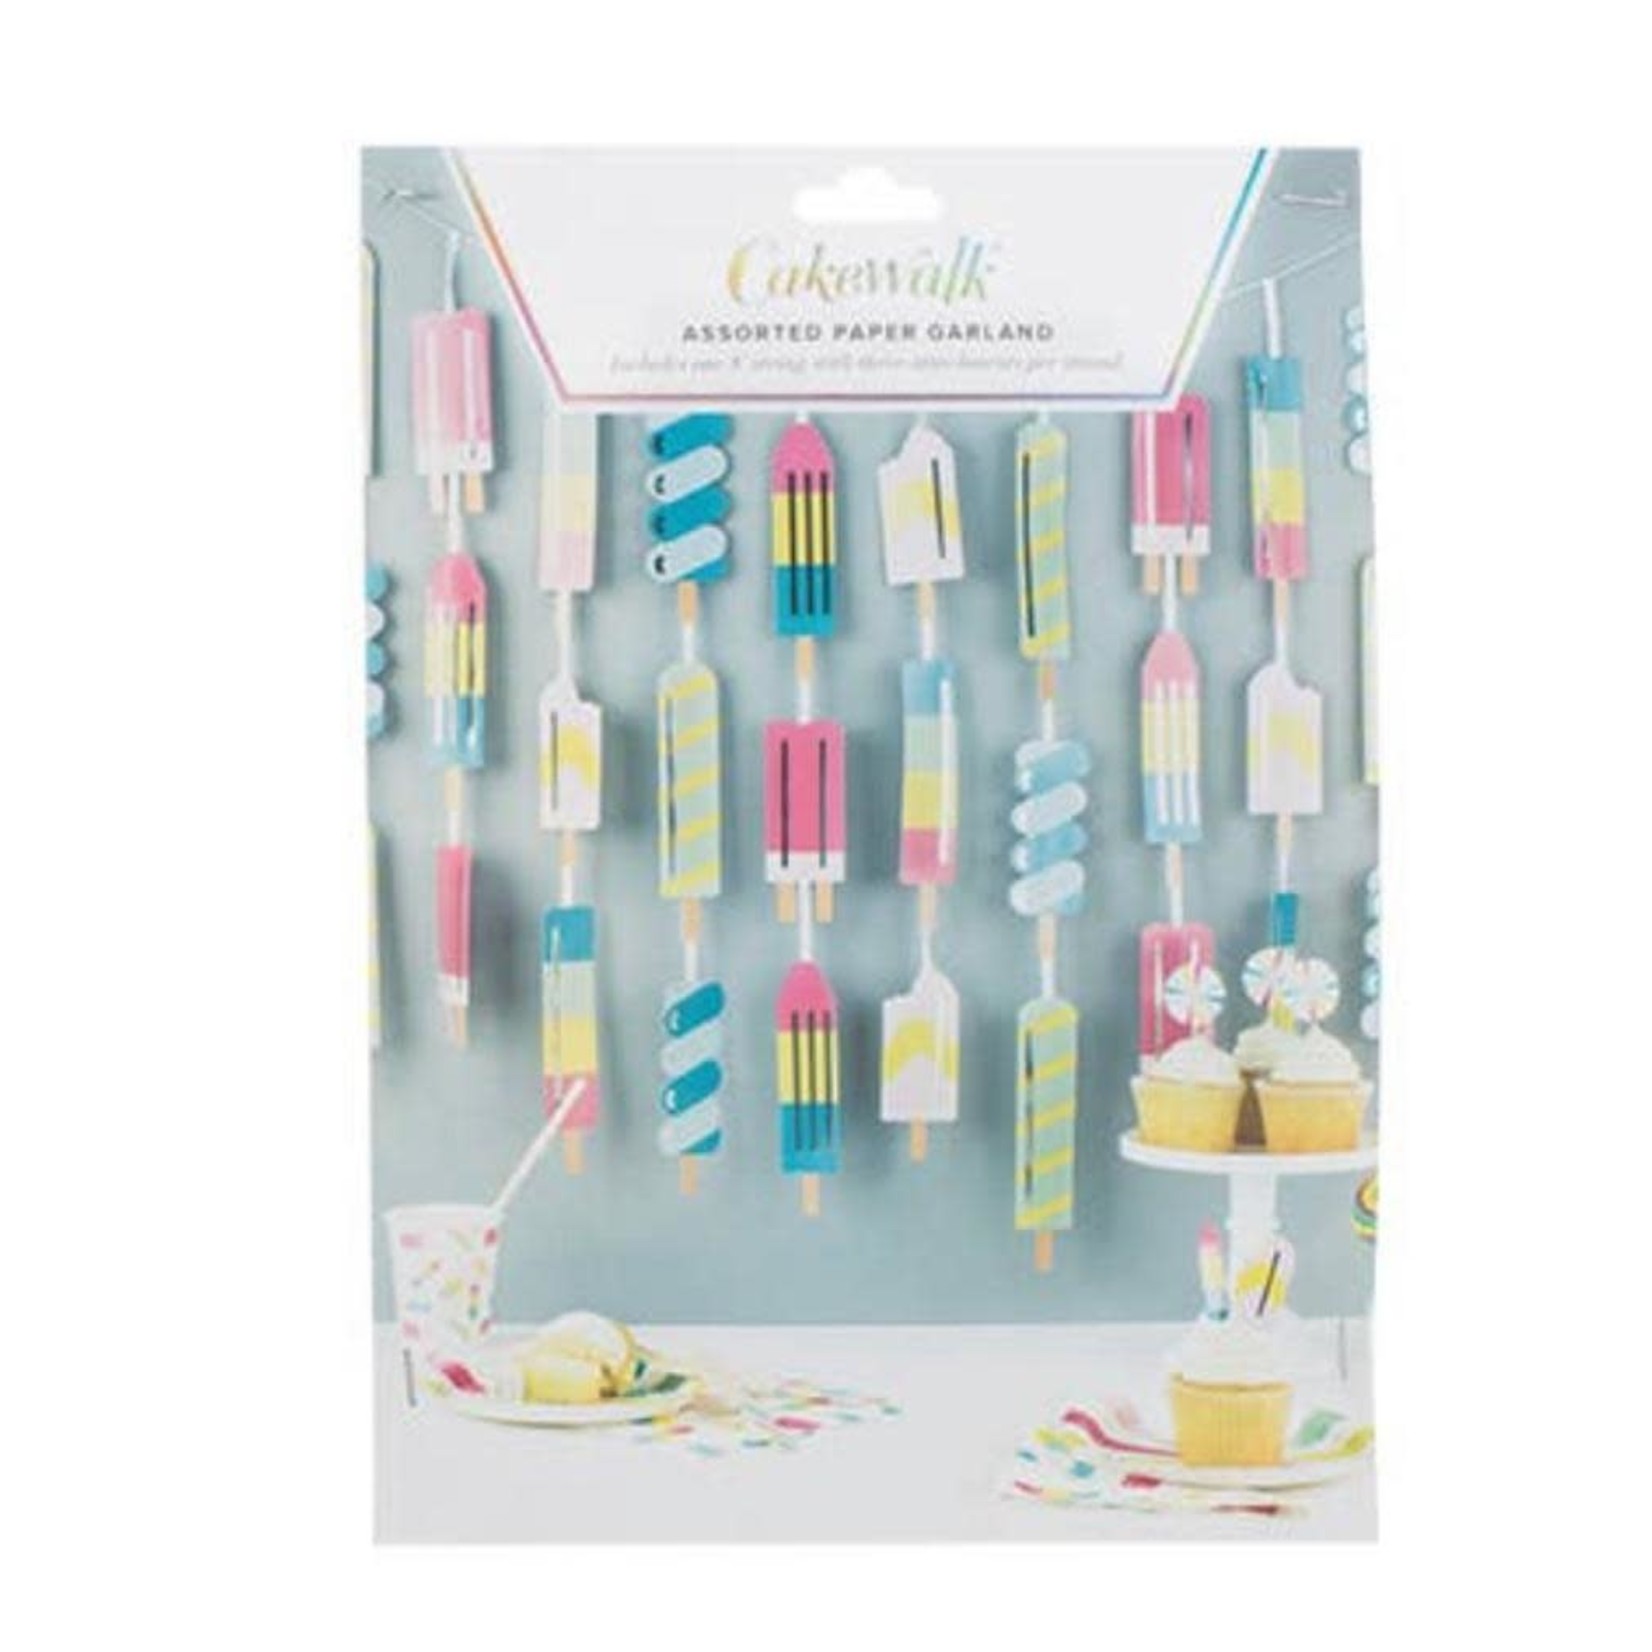 Creative Twist Events Ice Lolly Garland